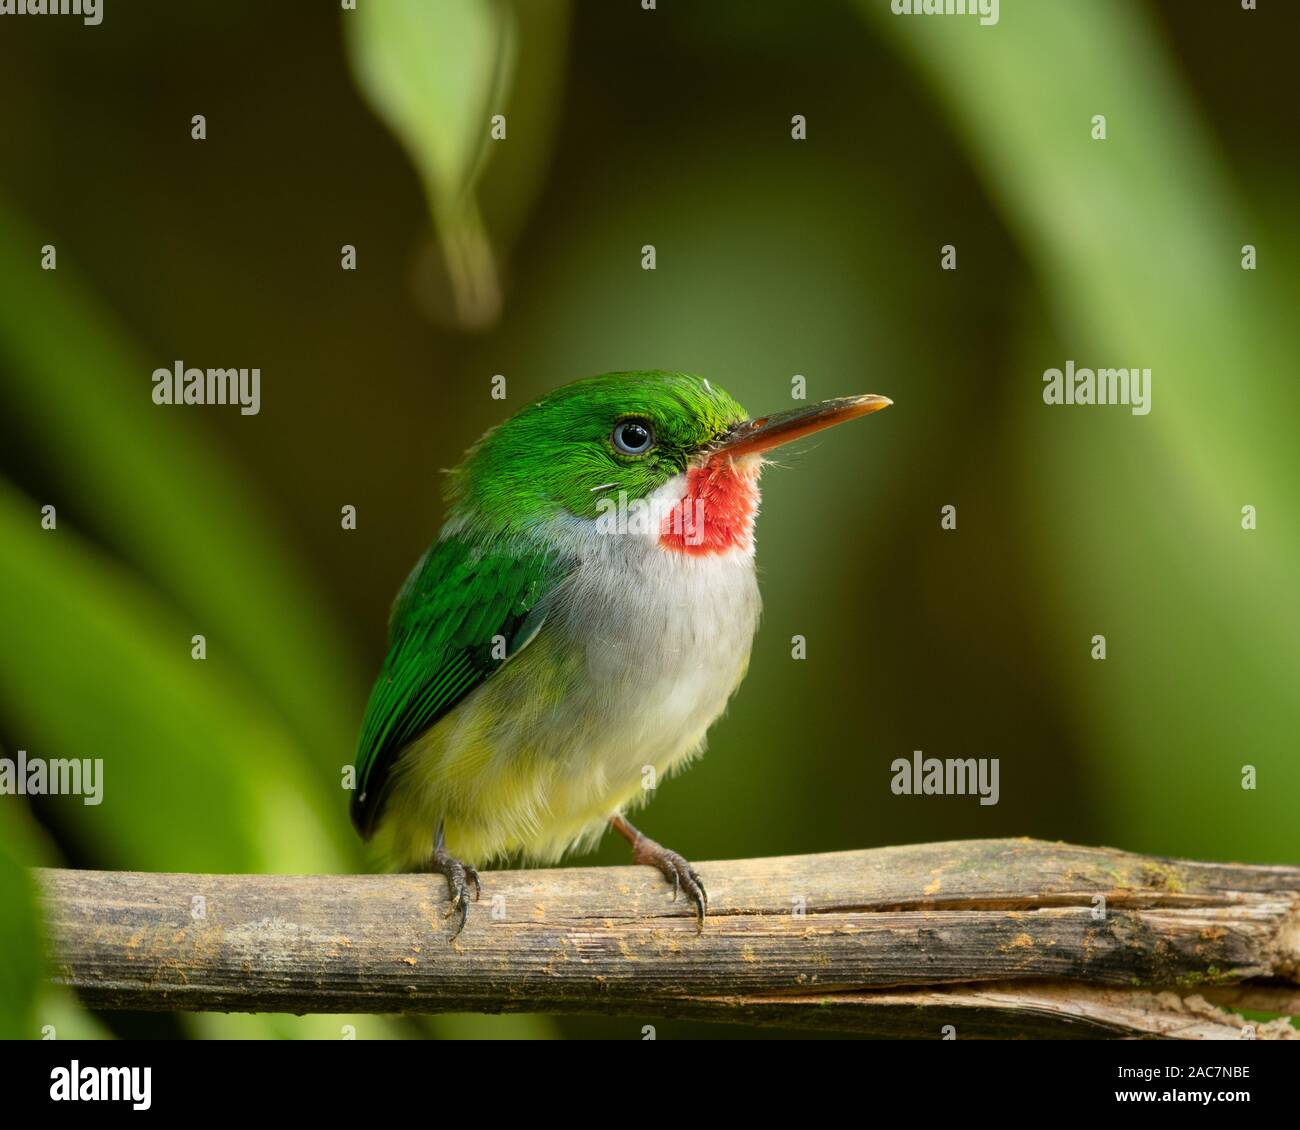 Puerto Rican Tody (Todus mexicanus) in El Yunque National Forest, Puerto Rico. Endemic to Puerto Rico. Possibly the cutest bird in the world. Stock Photo